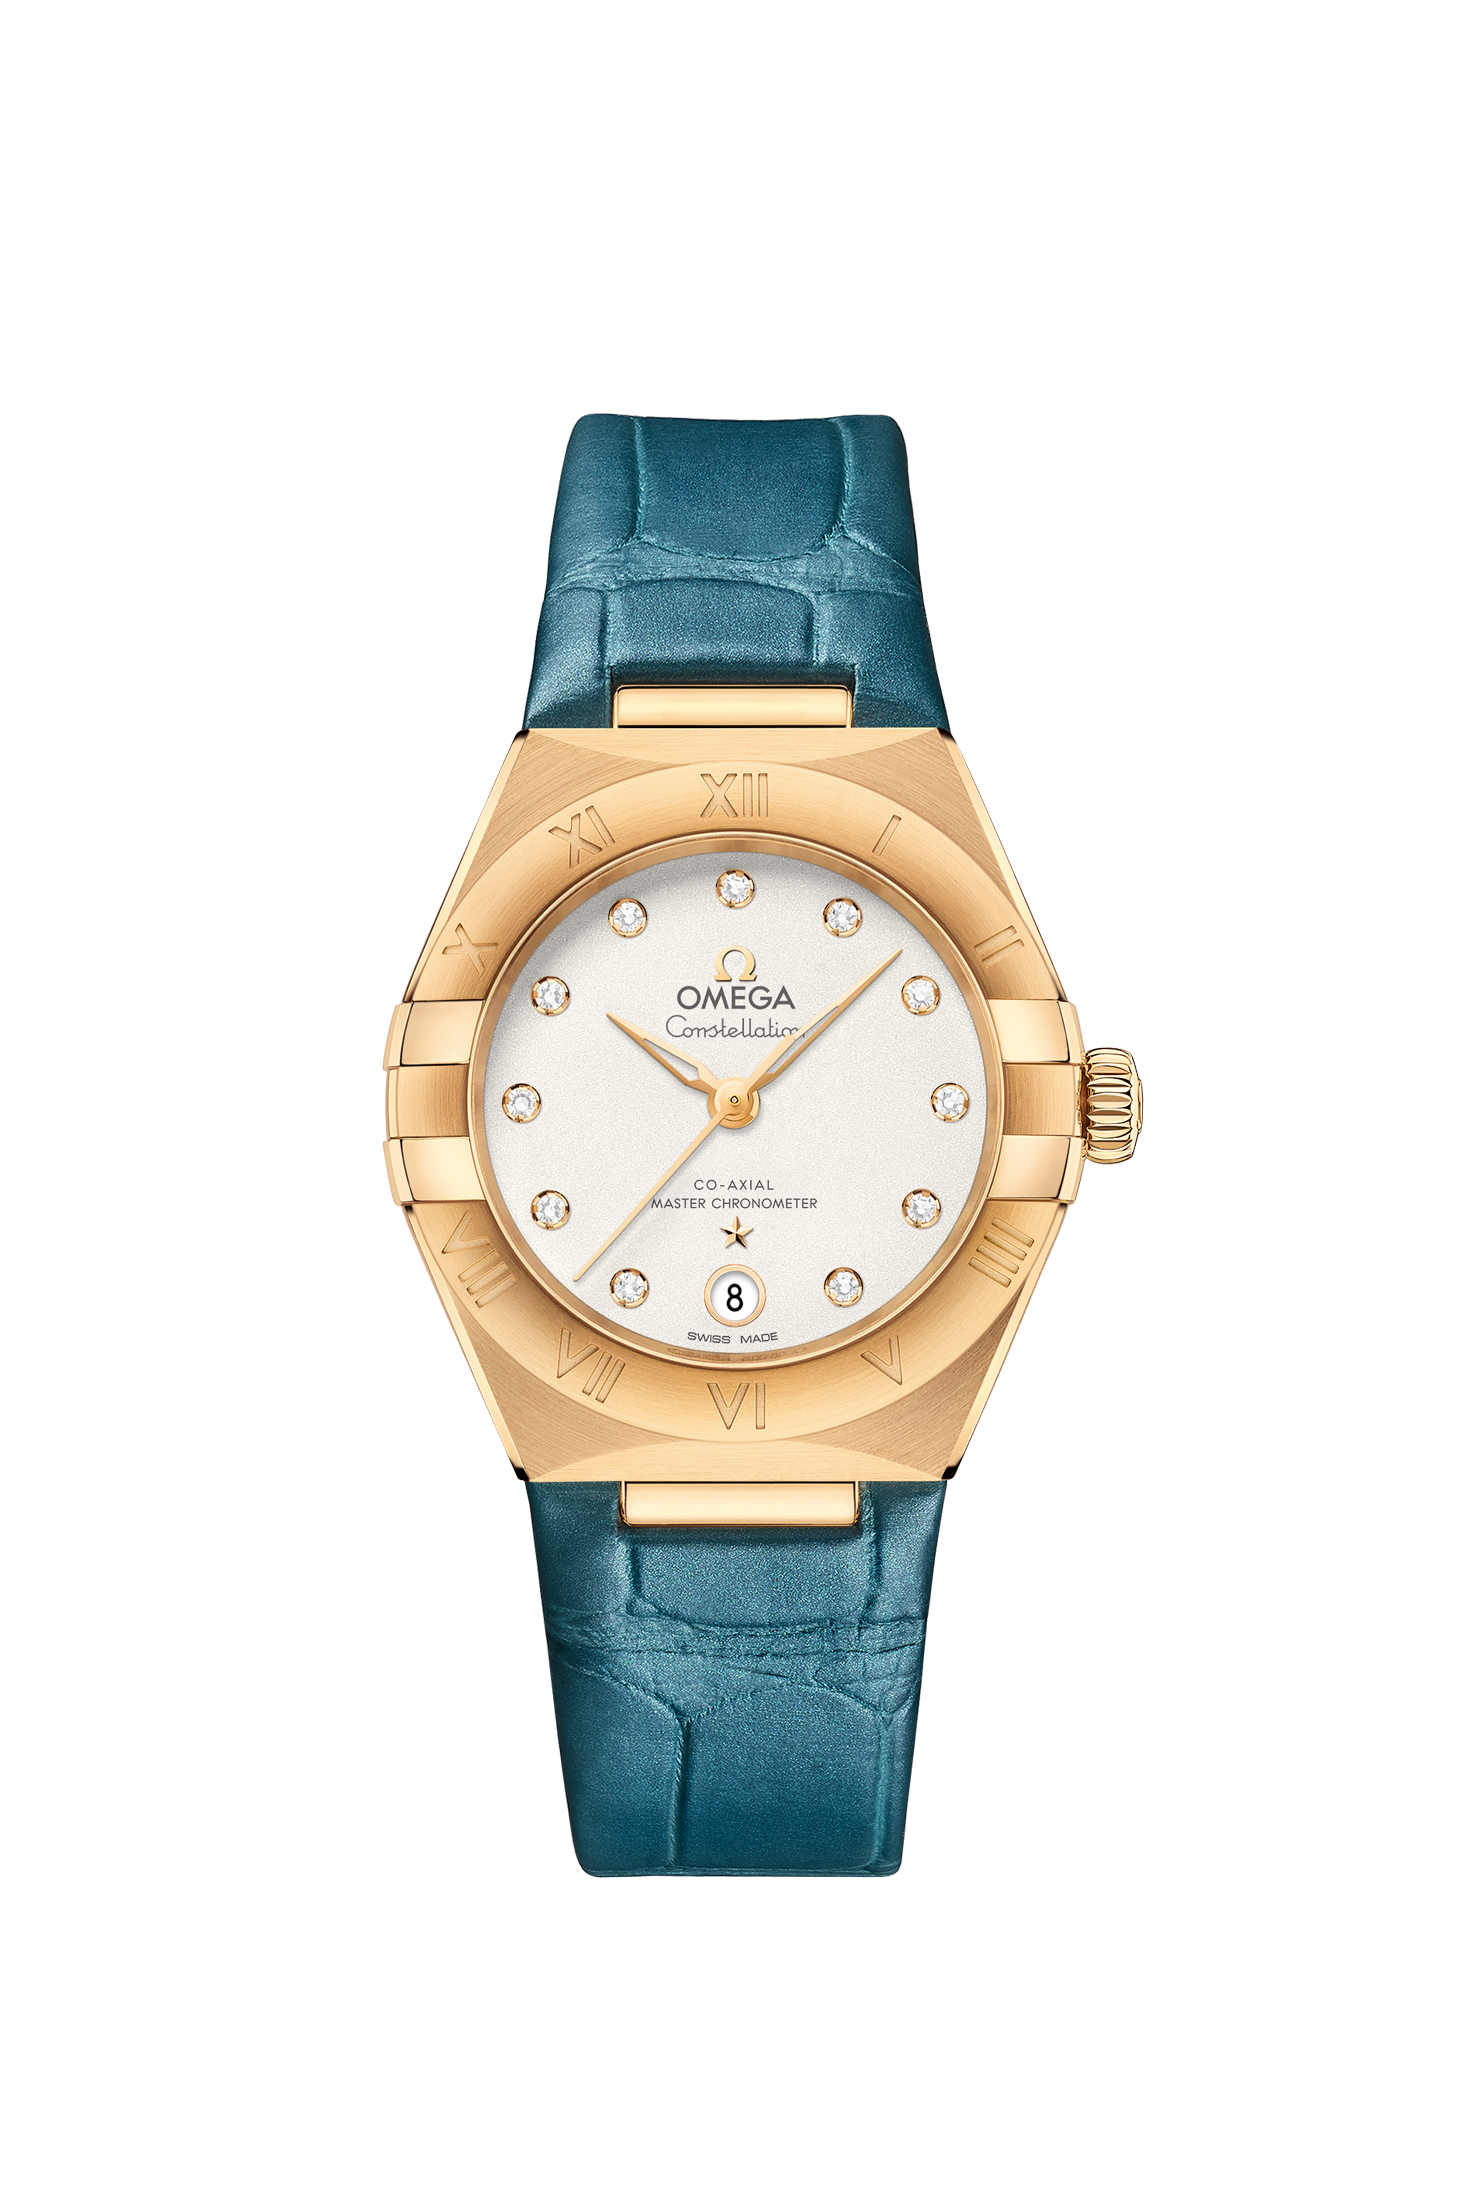 Ladies' watch  OMEGA, Constellation Co Axial Master Chronometer / 29mm, SKU: 131.53.29.20.52.001 | watchapproach.com